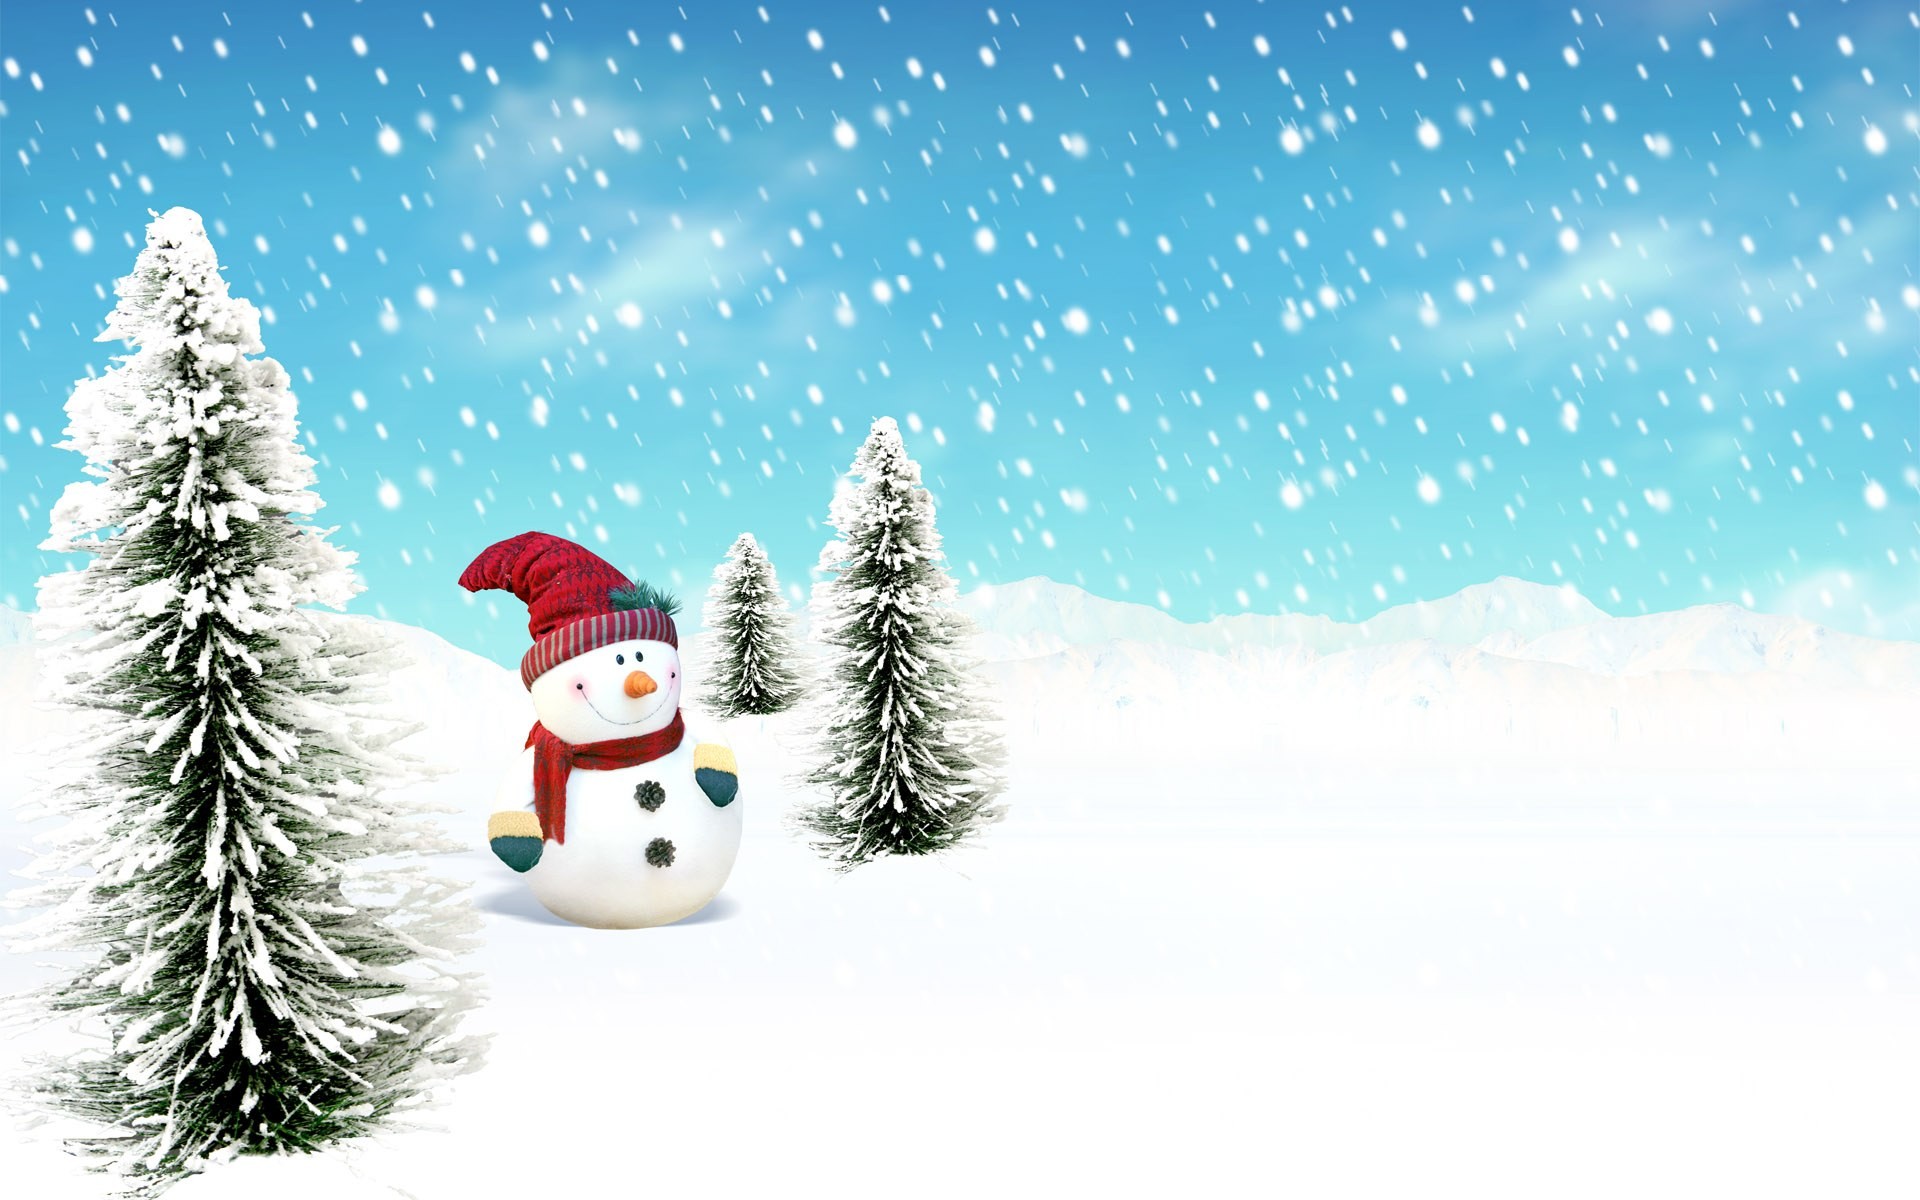 1920x1200 Christmas Background Wallpaper 10 cool pictures , picture, image or photo